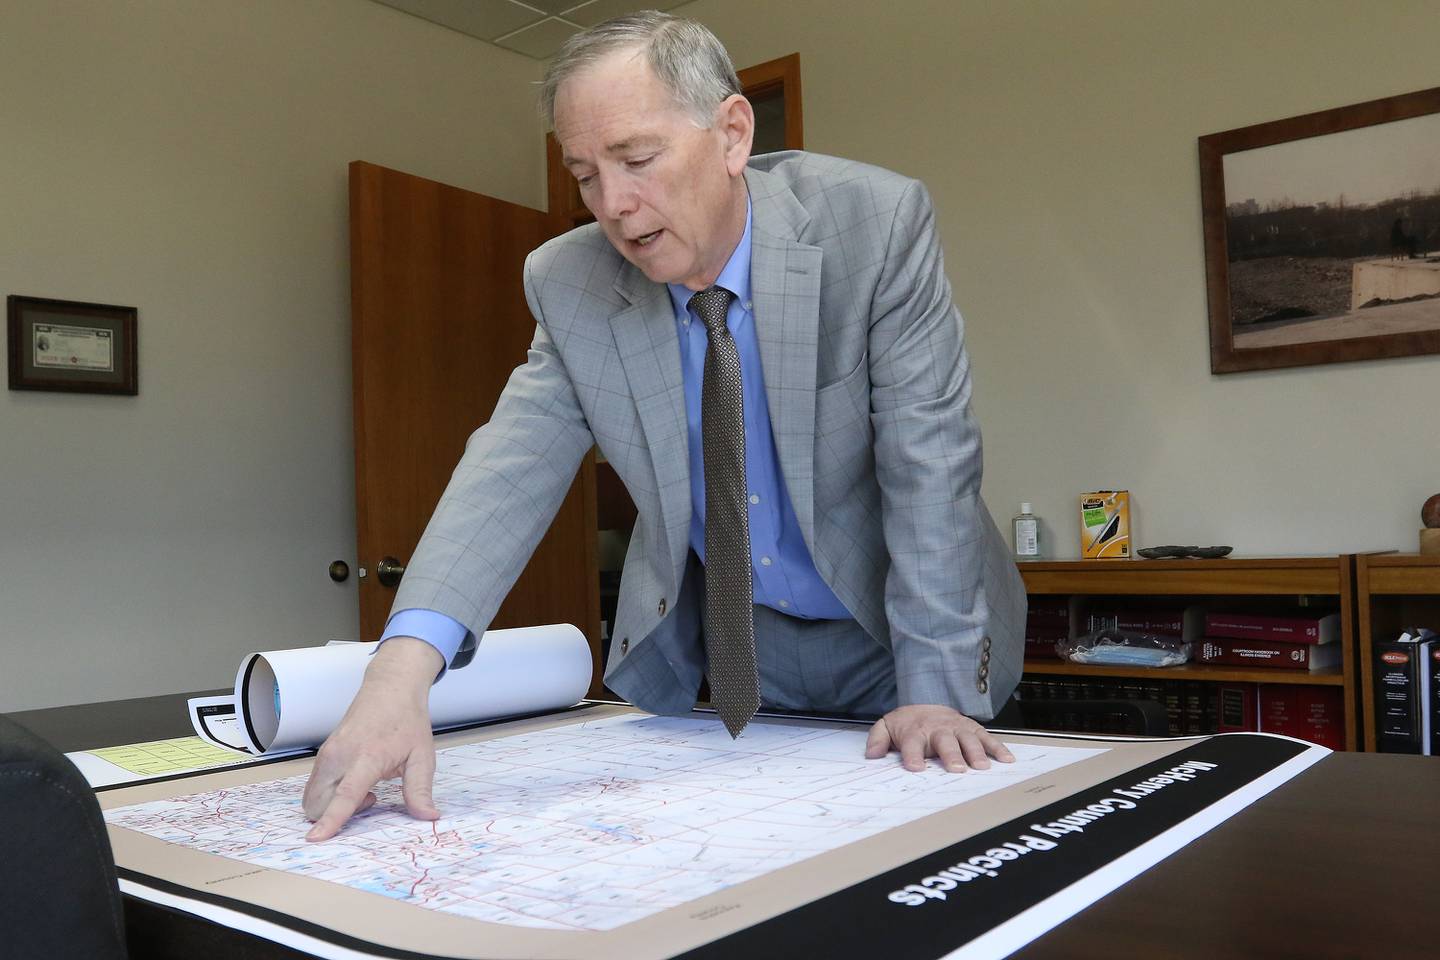 McHenry County Board member Joe Gottemoller shows a current map of McHenry County voter districts and precincts on Friday, April 30, 2021, in Crystal Lake. The county is considering redistricting and is awaiting updated census information.